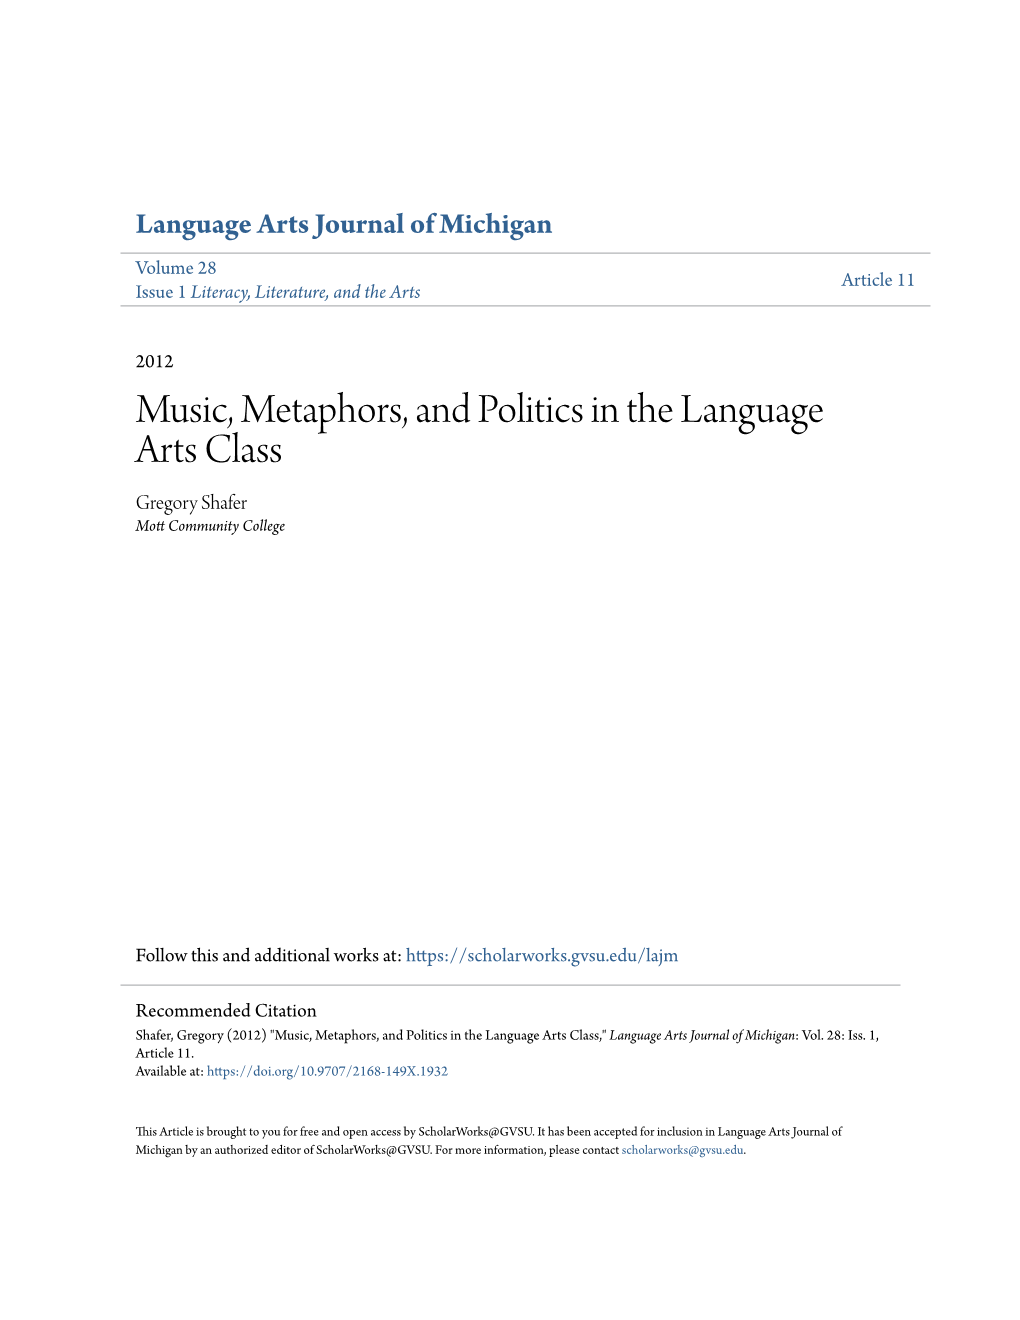 Music, Metaphors, and Politics in the Language Arts Class Gregory Shafer Mott Community College